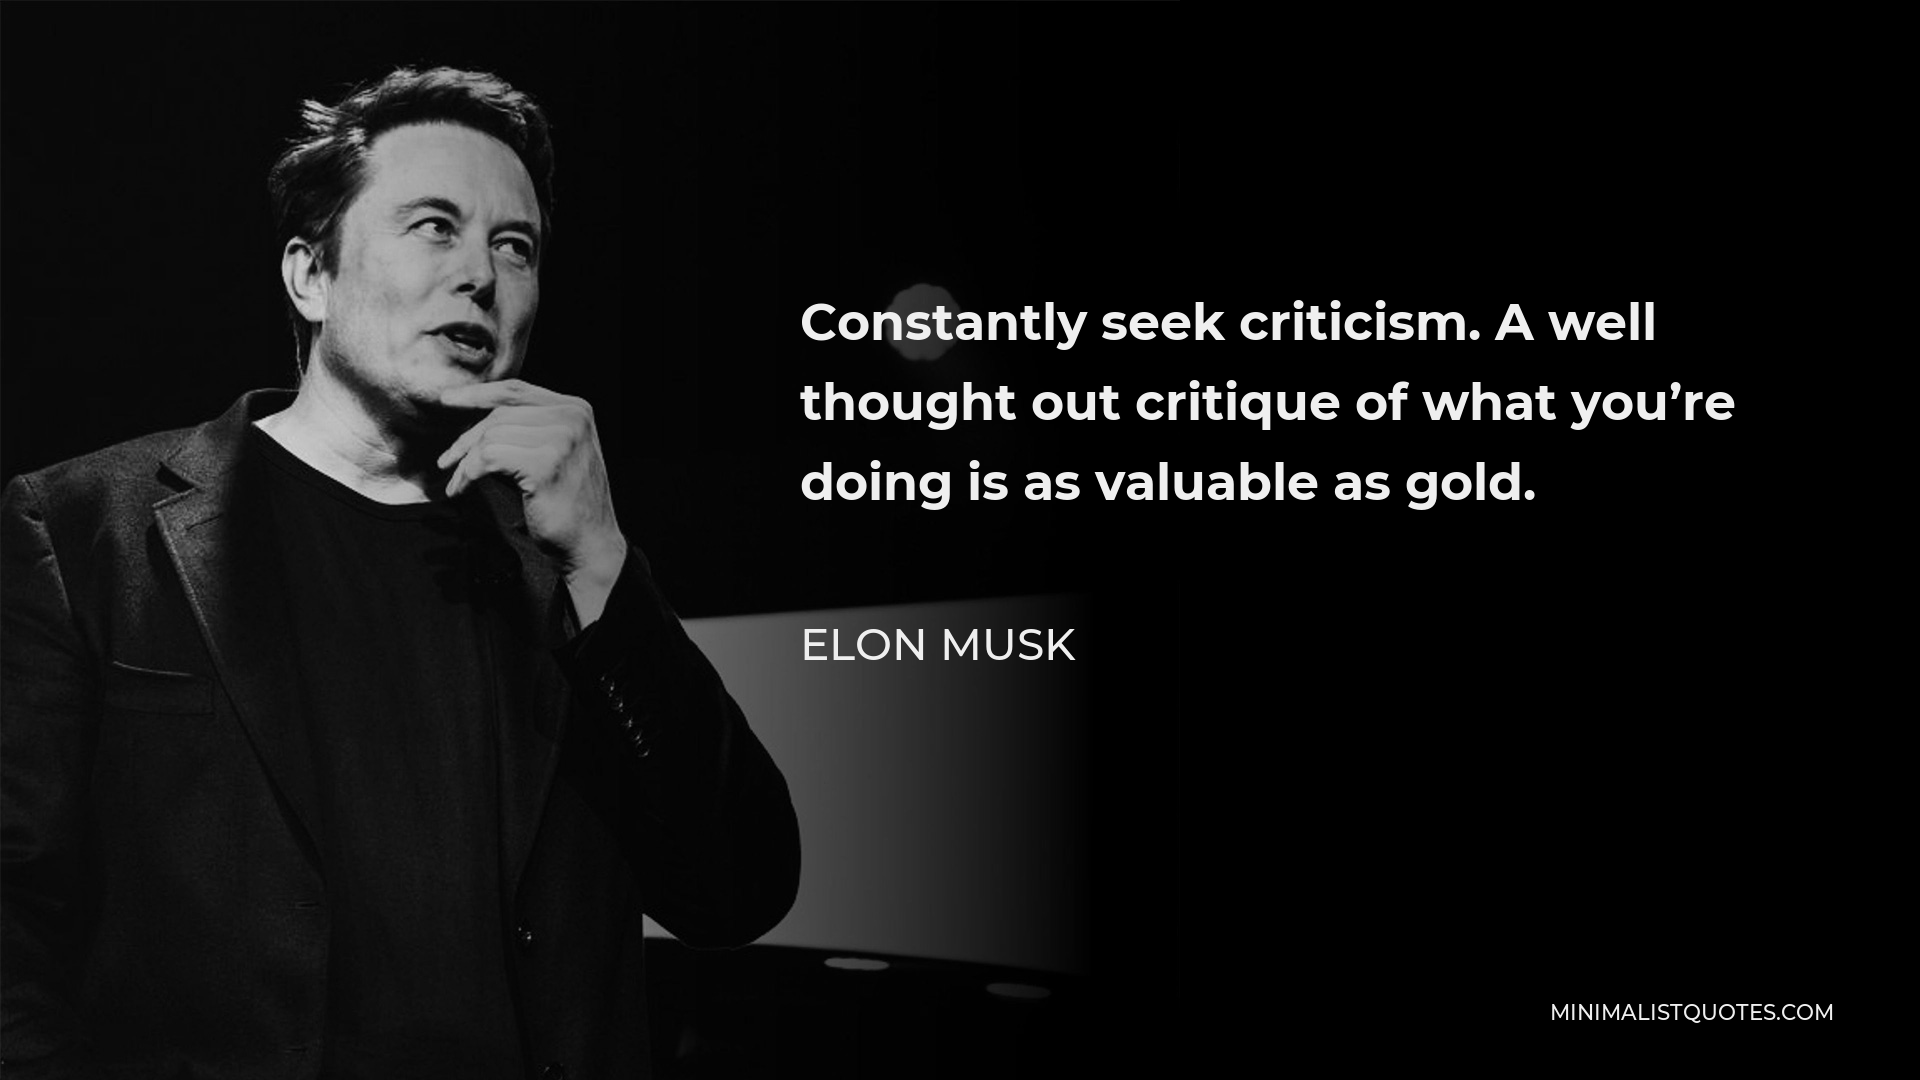 Elon Musk Quote - Constantly seek criticism. A well thought out critique of what you’re doing is as valuable as gold.